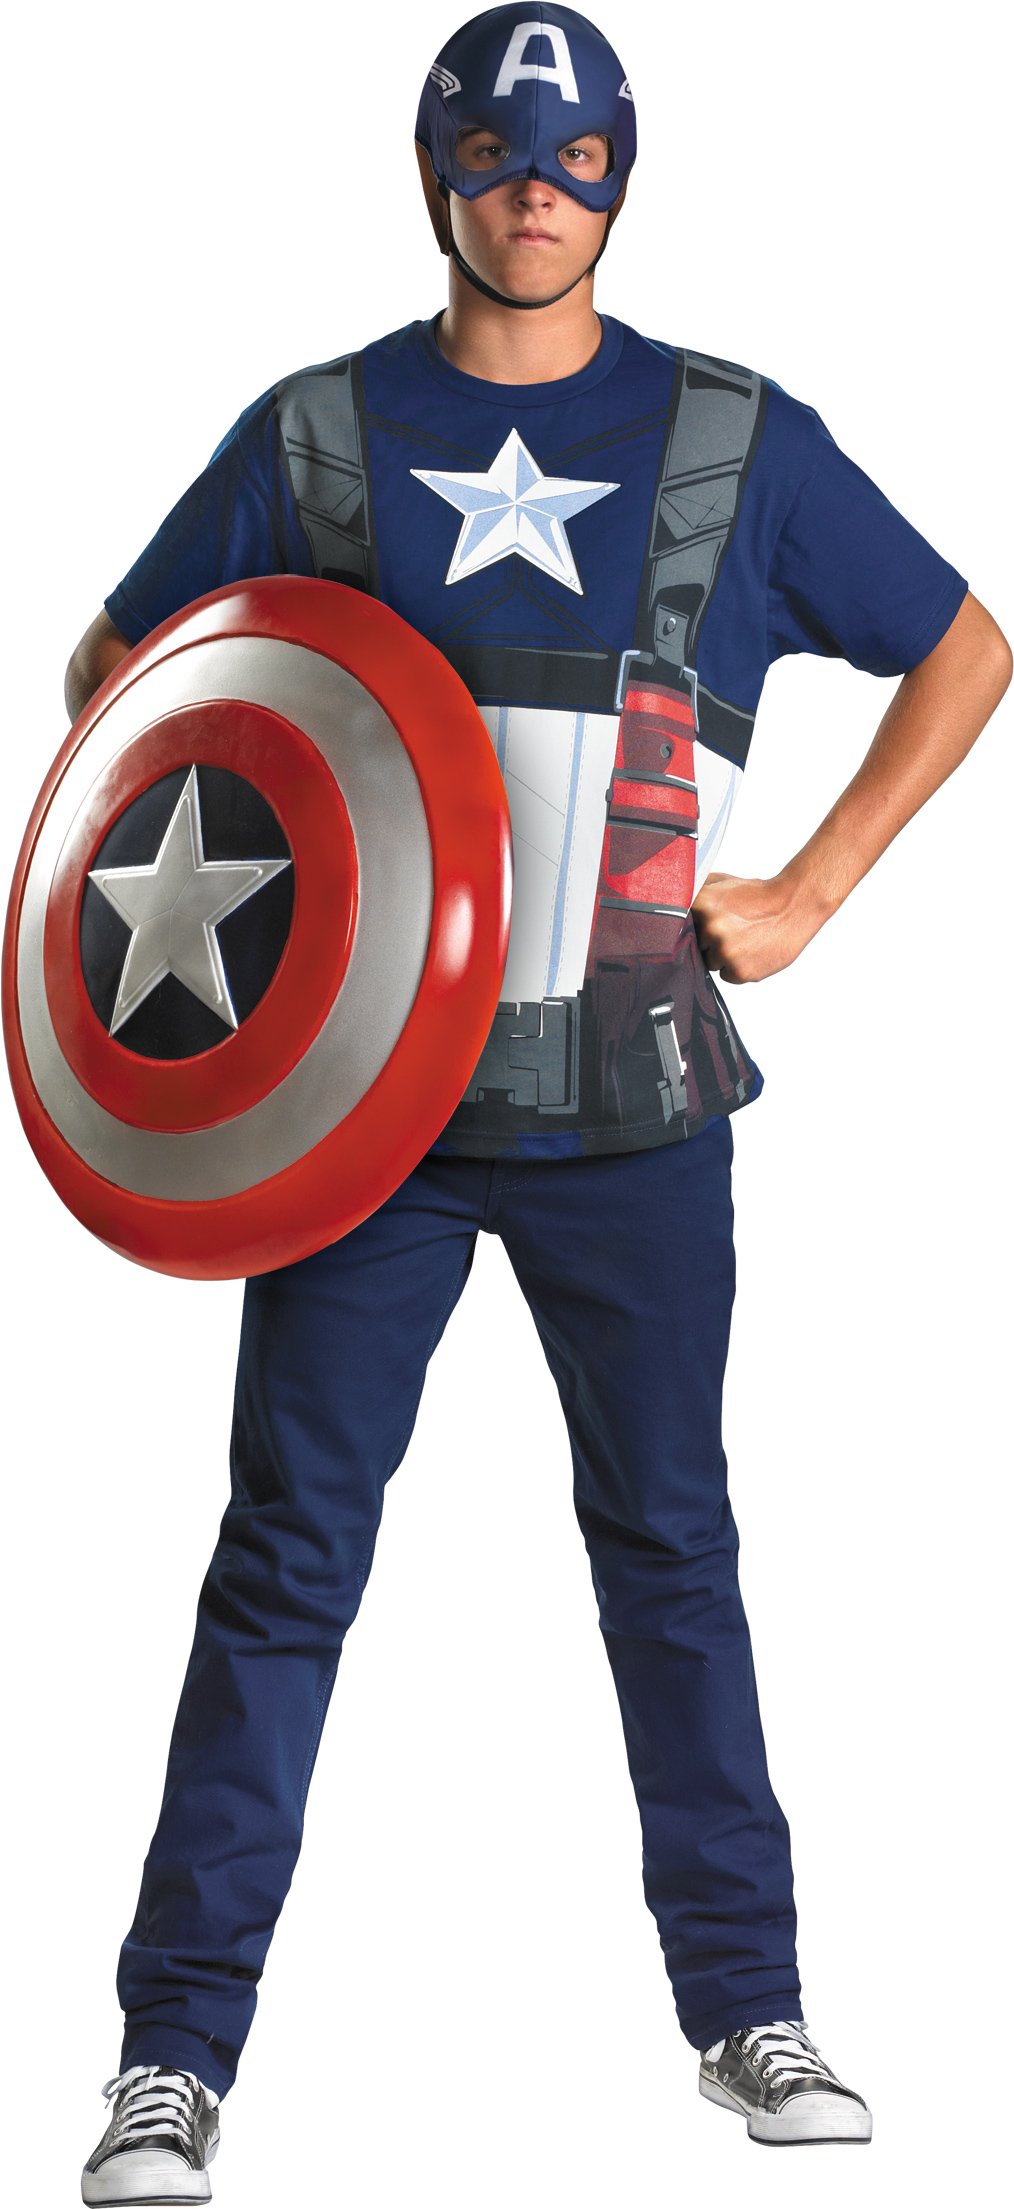 Captain America T-Shirt And Mask Adult Costume Set